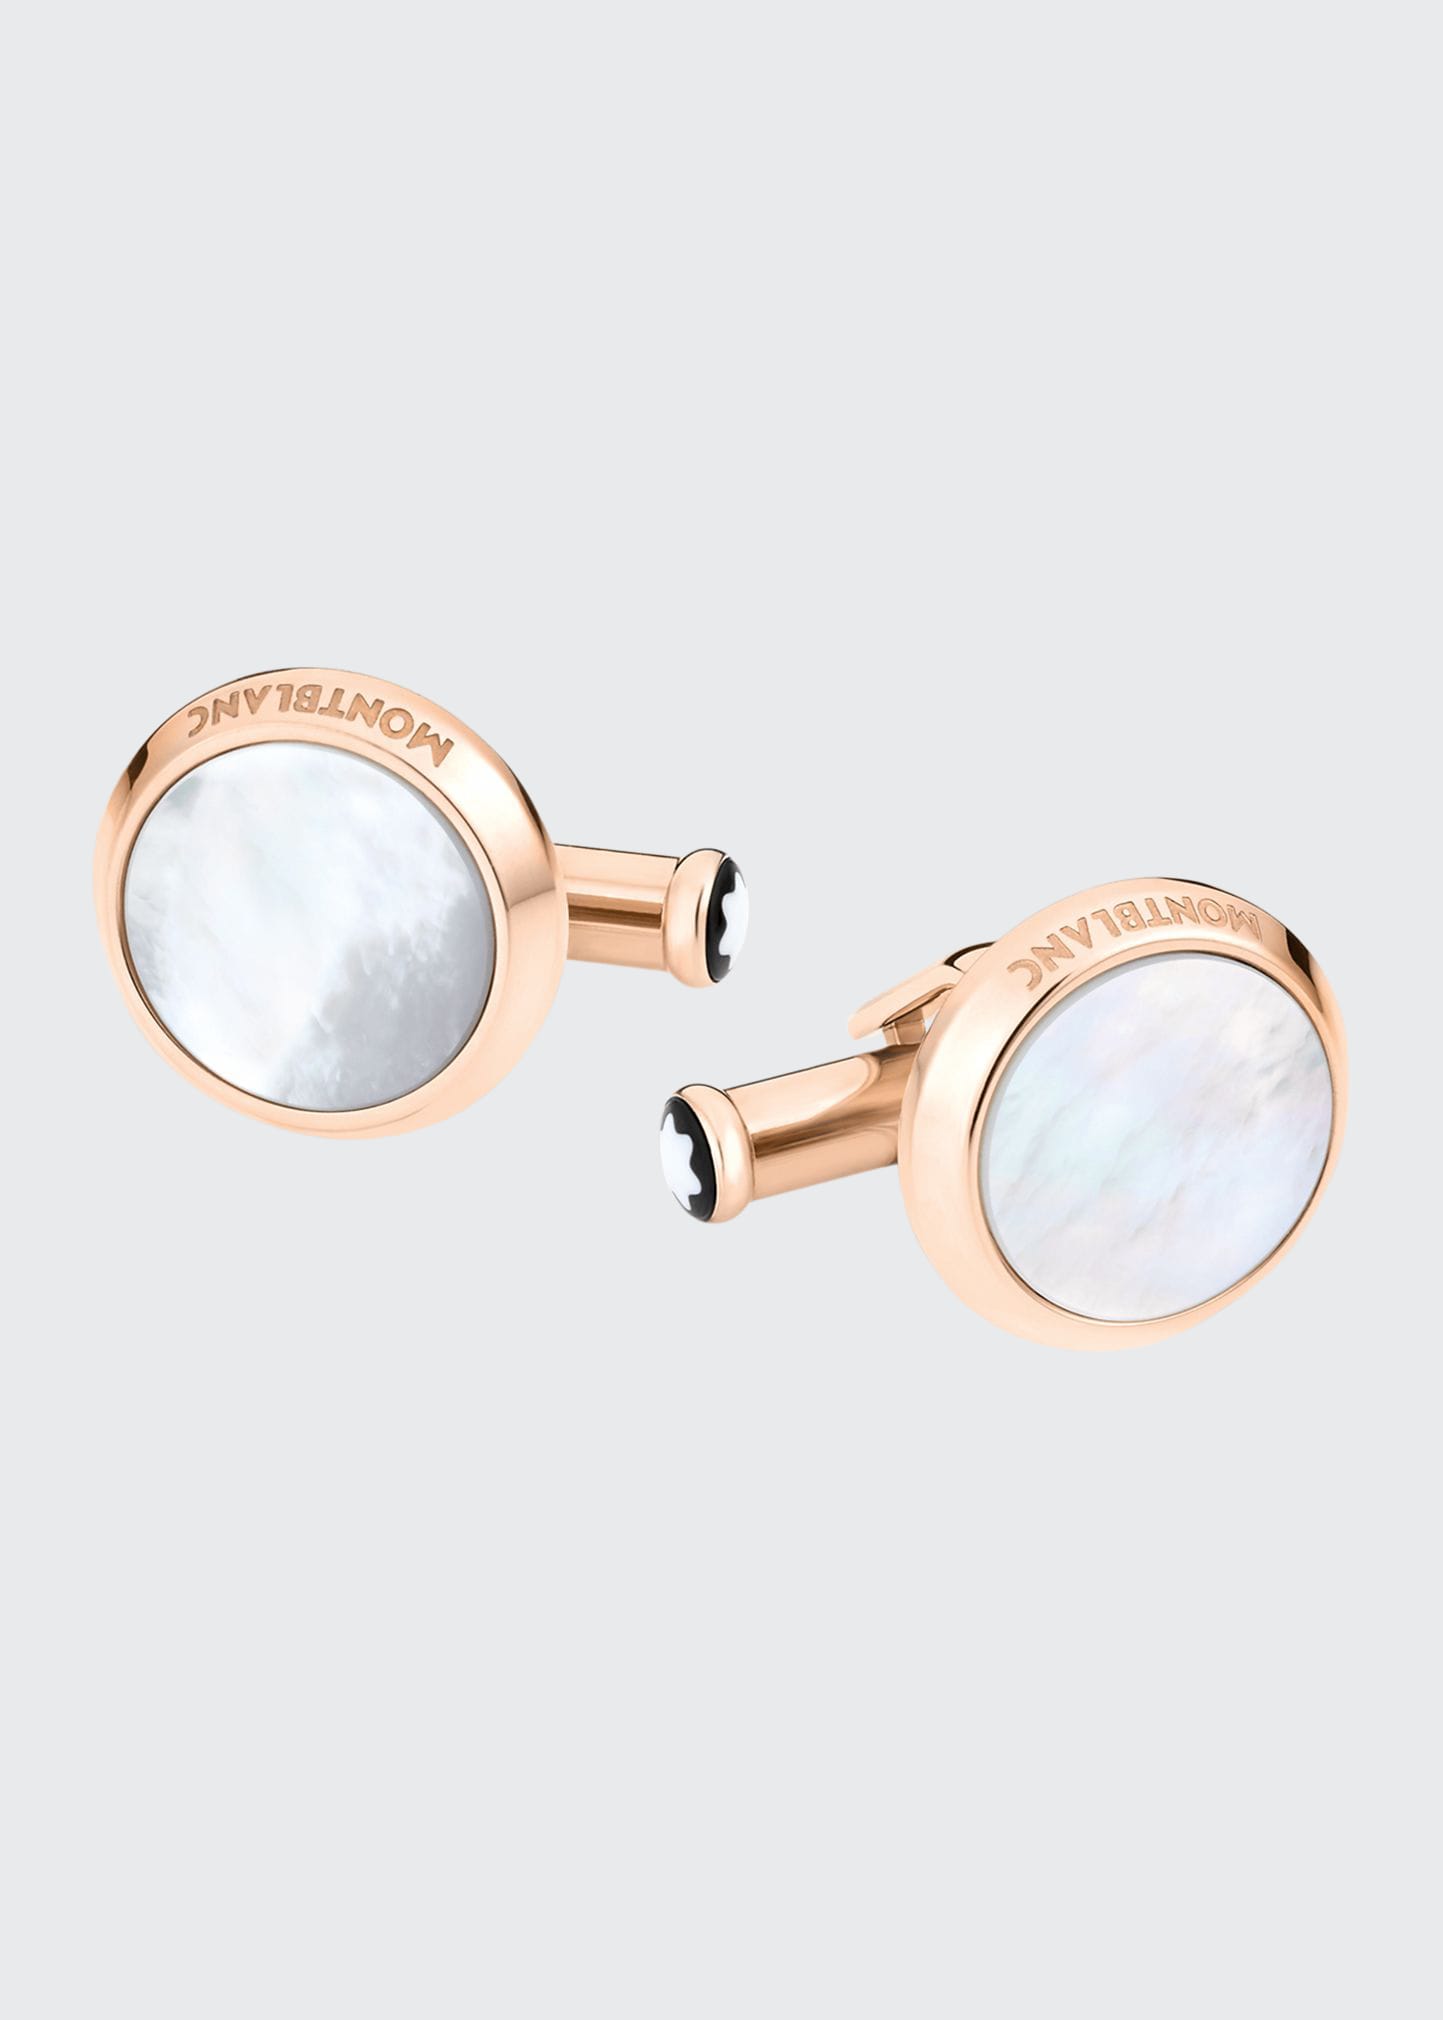 Montblanc Mother-of-Pearl Round Rose Golden Cuff Links